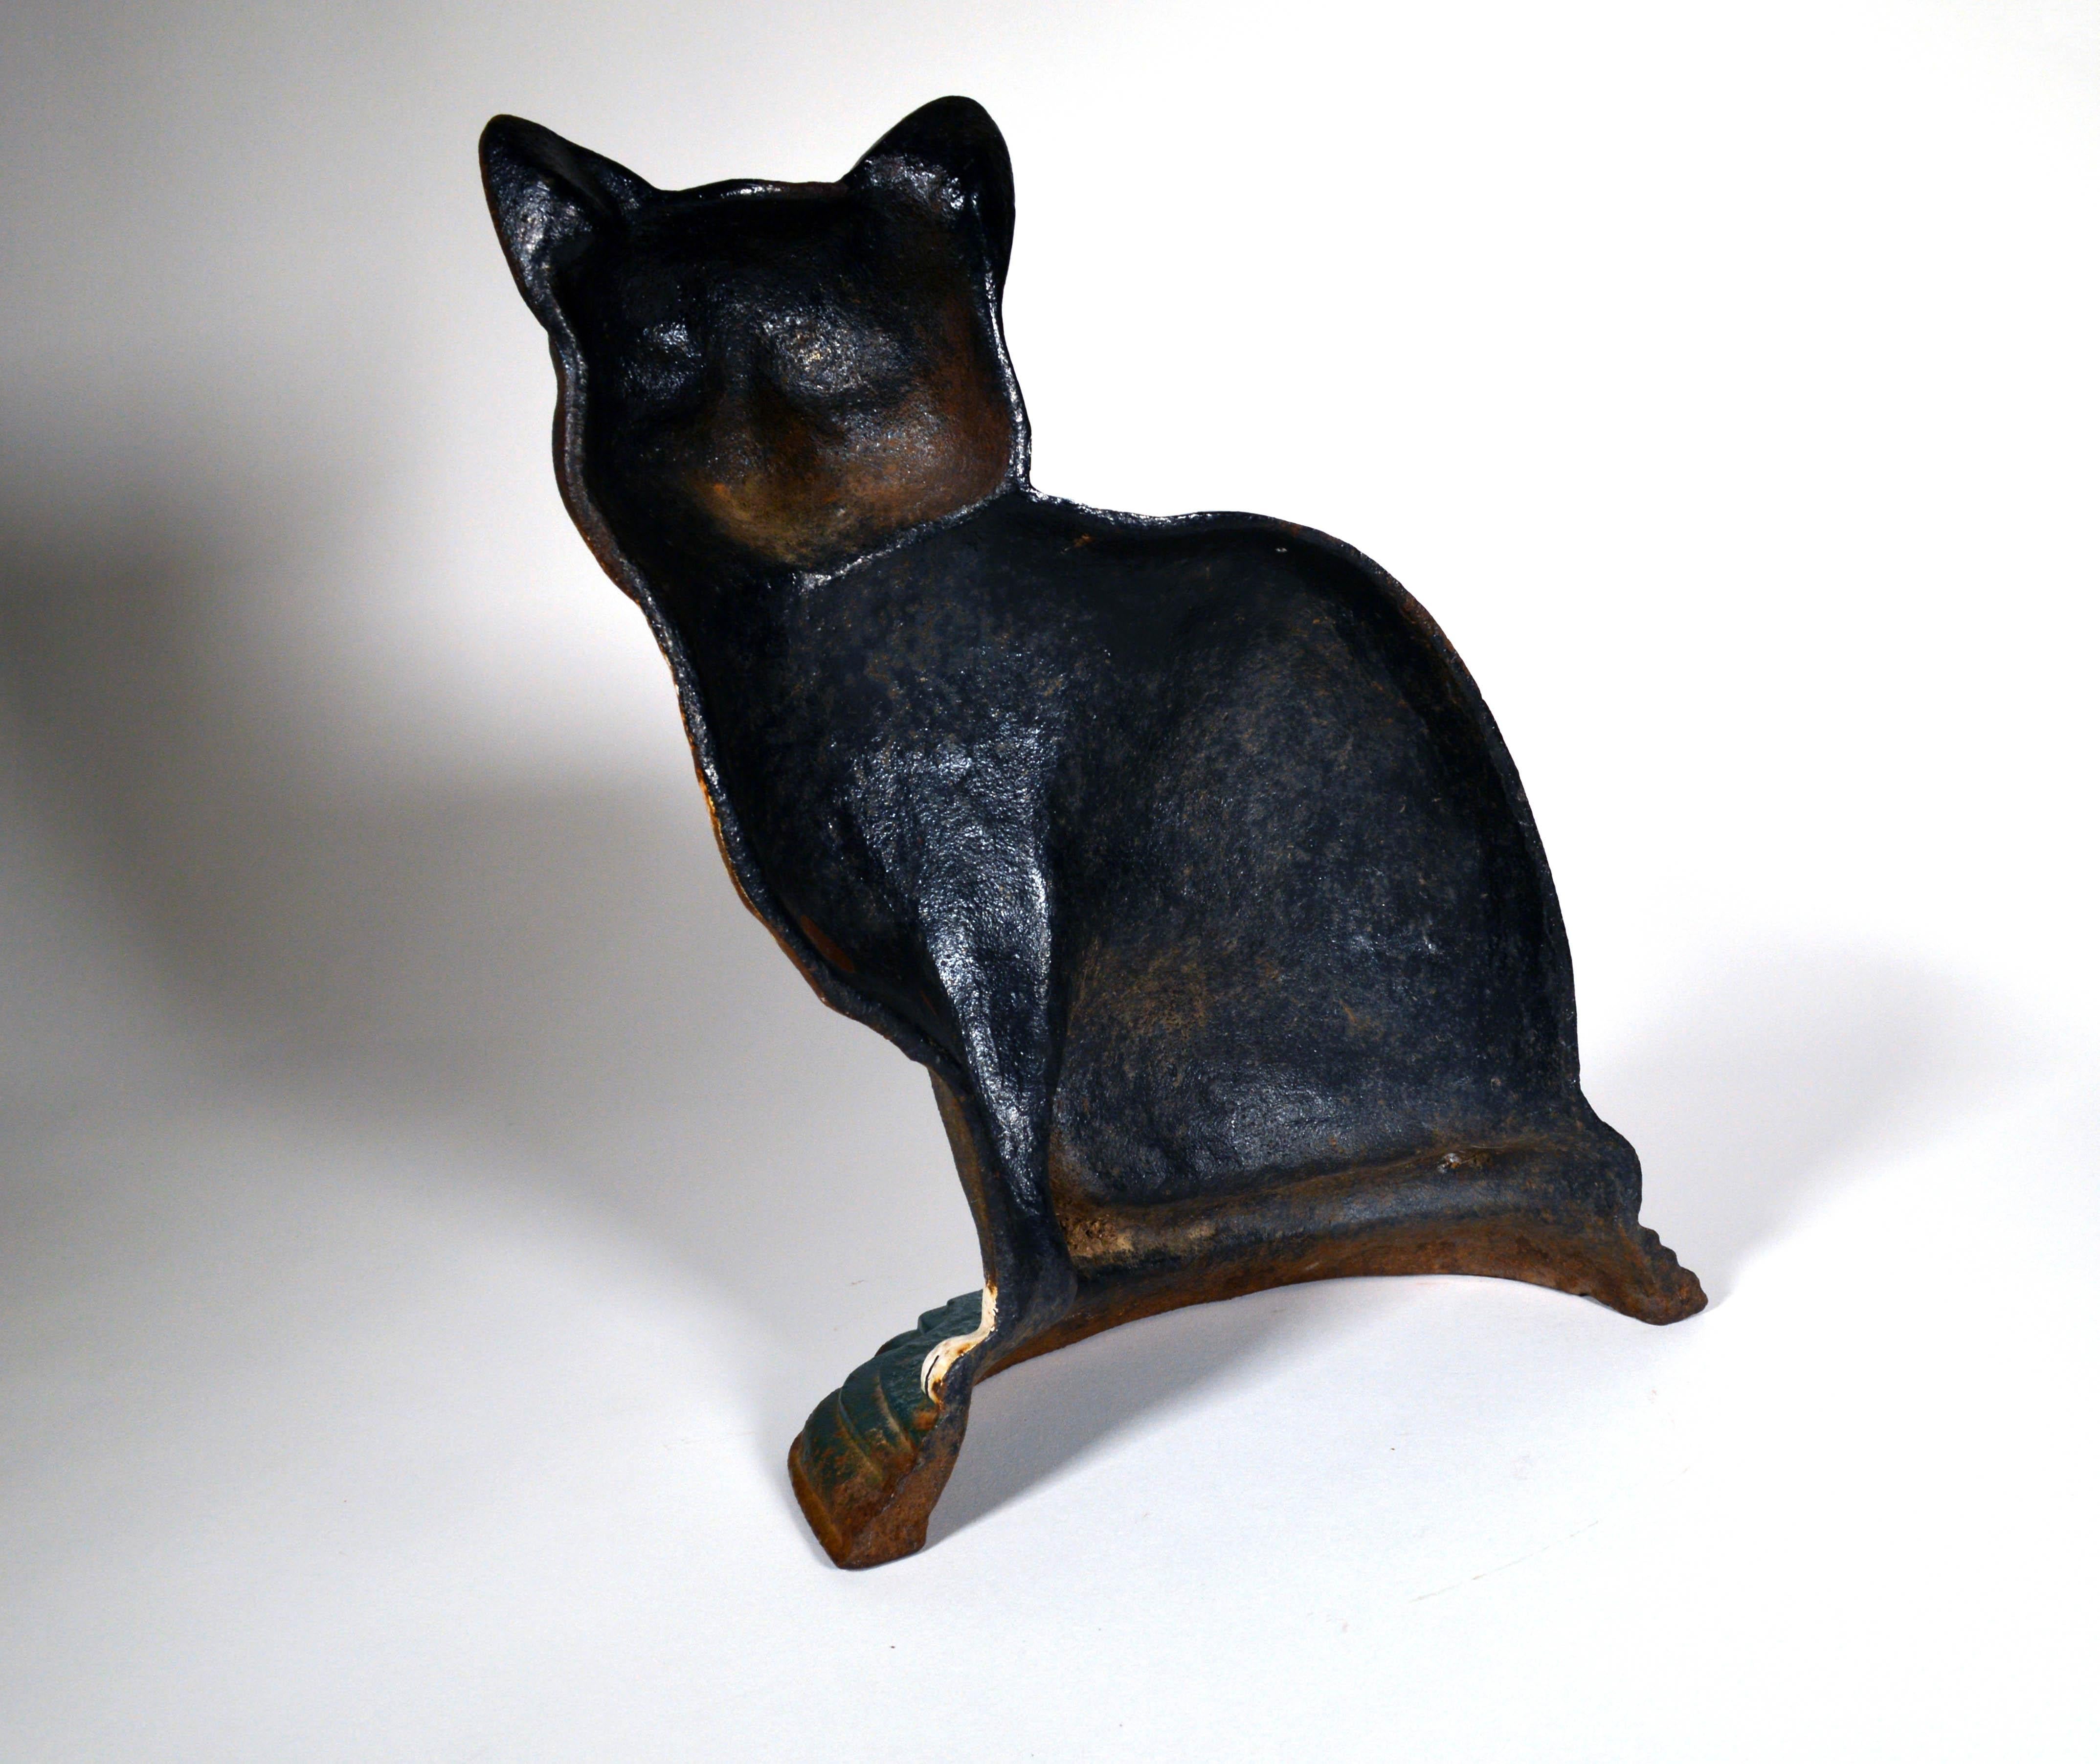 American cast iron cat door stop in form of a cat,
Early 20th century 
   


The American cast iron door stop is in the shape of a cat with reverse painted glass eyes and sitting on its haunches with its tail curled in front, and cold painted